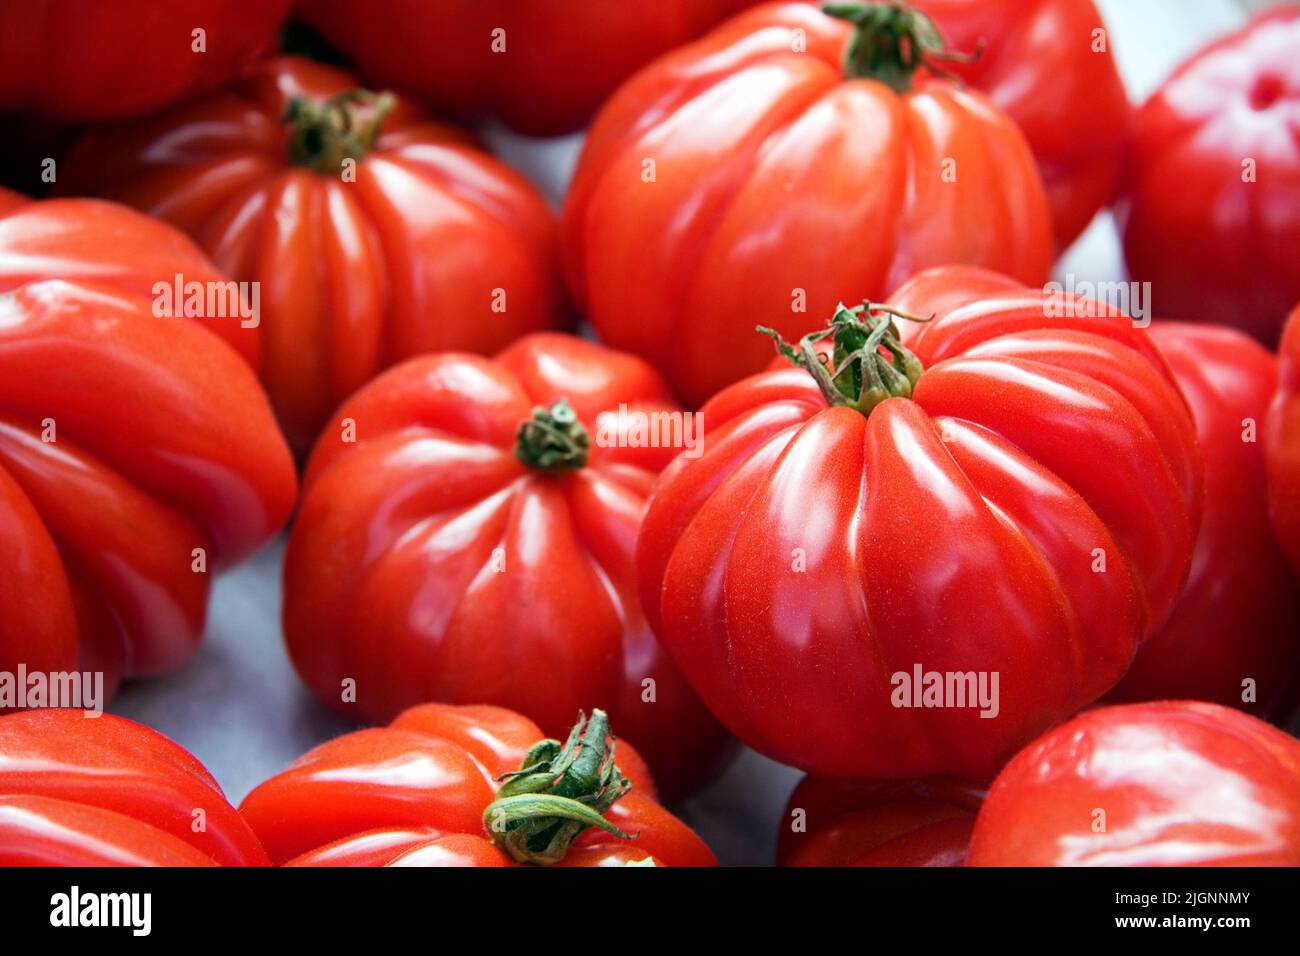 Fresh ripe tomatoes displayed for sale at a market Stock Photo